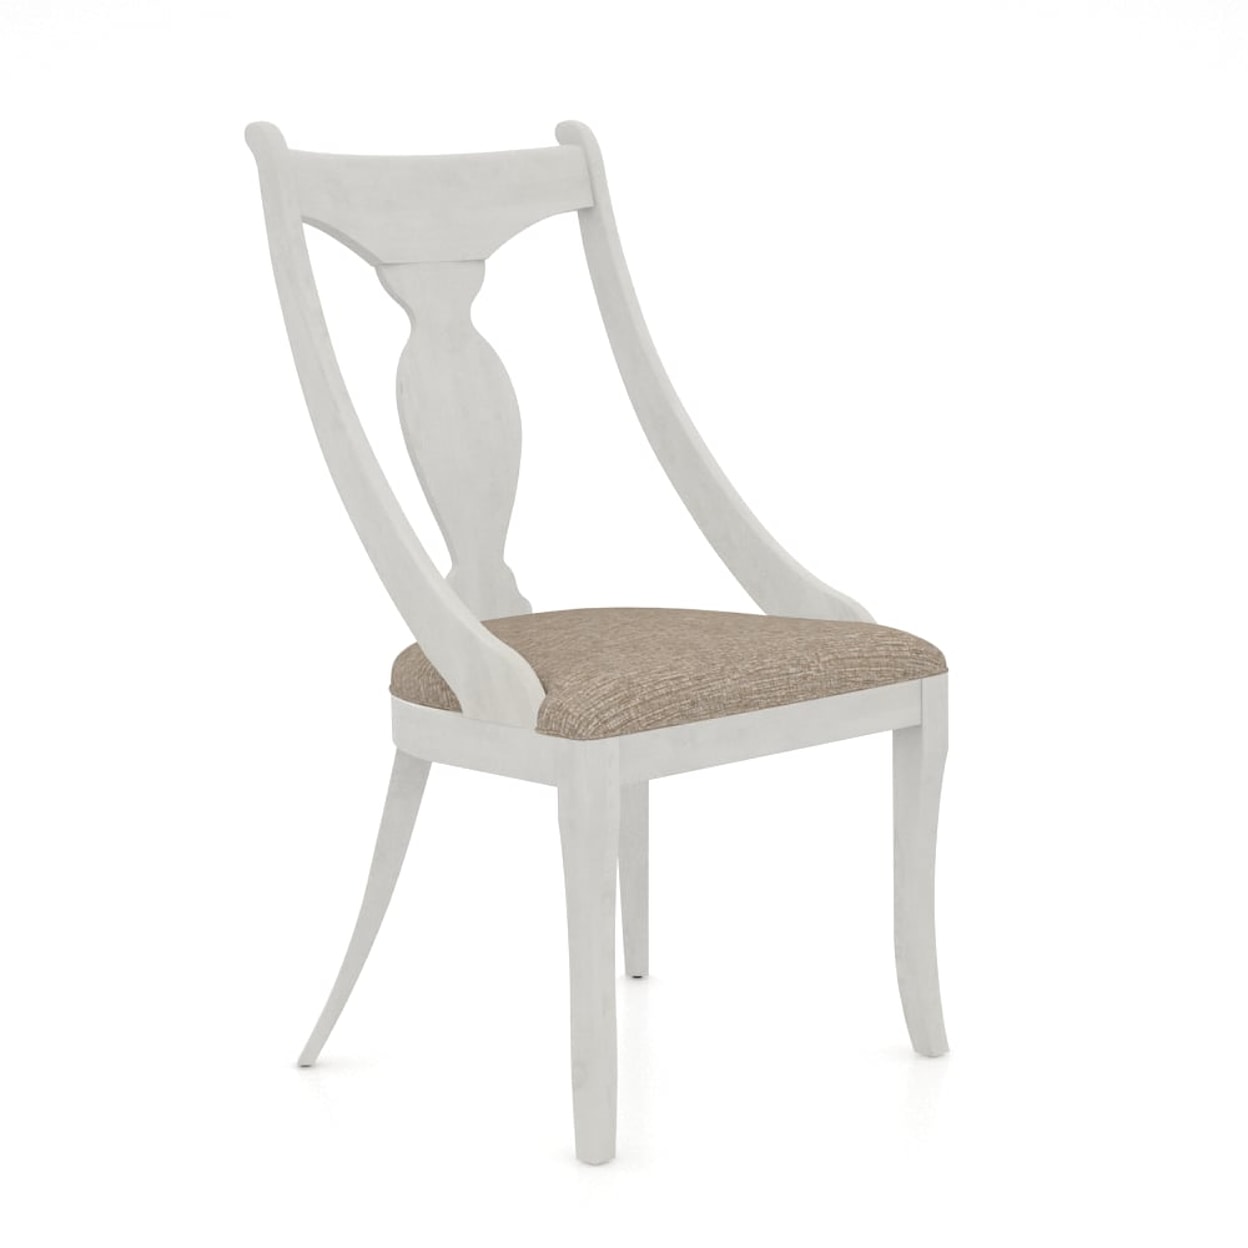 Canadel Canadel Customizable Dining Chair with Uph. Seat